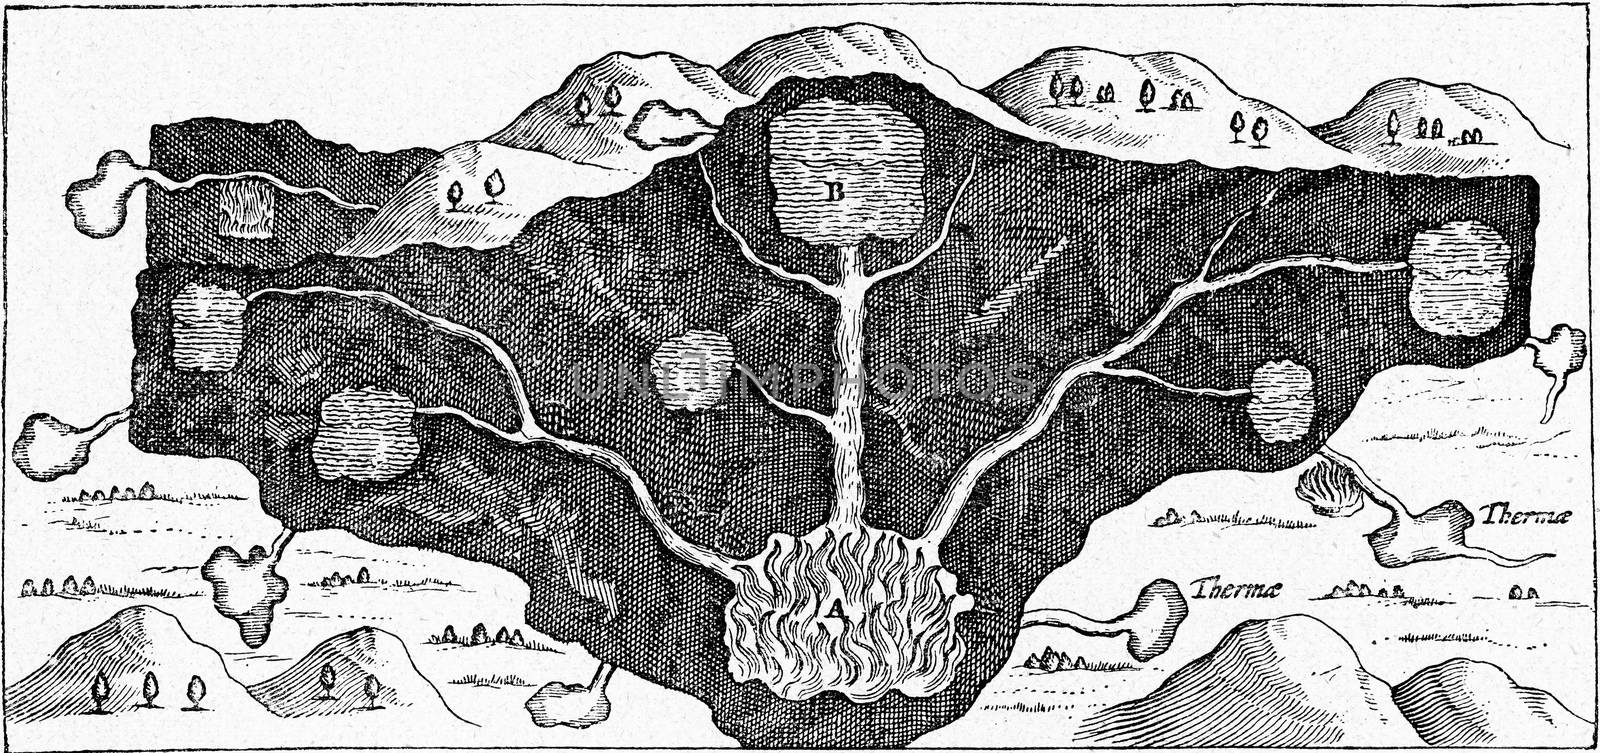 Formation of hot springs, vintage engraving. by Morphart